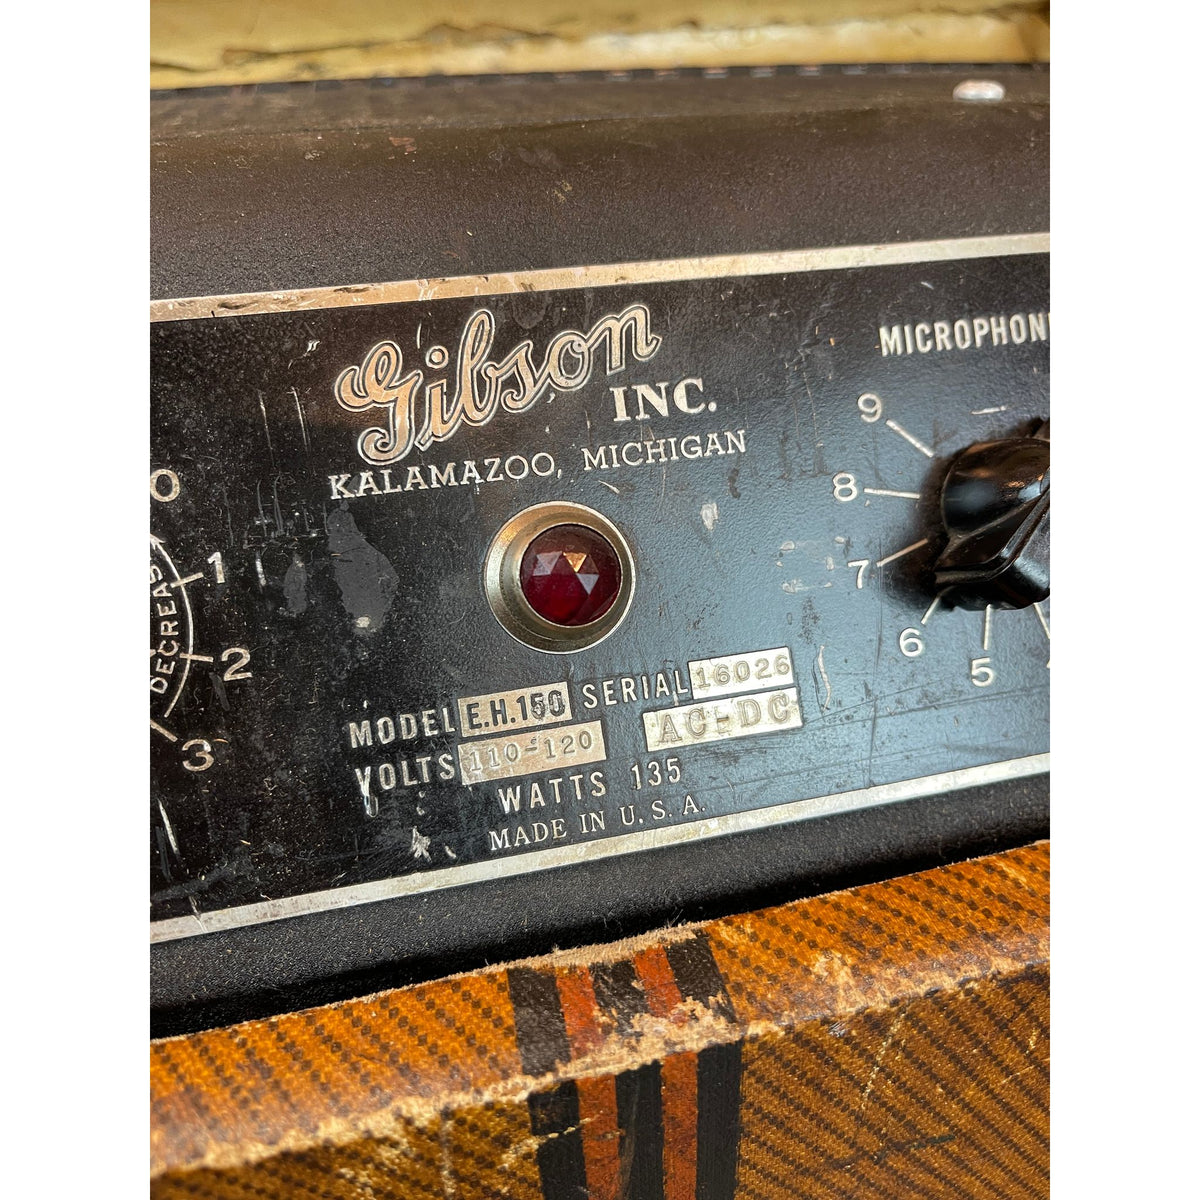 Used Gibson EH-185 Amp and Lap Steel set circa 1939